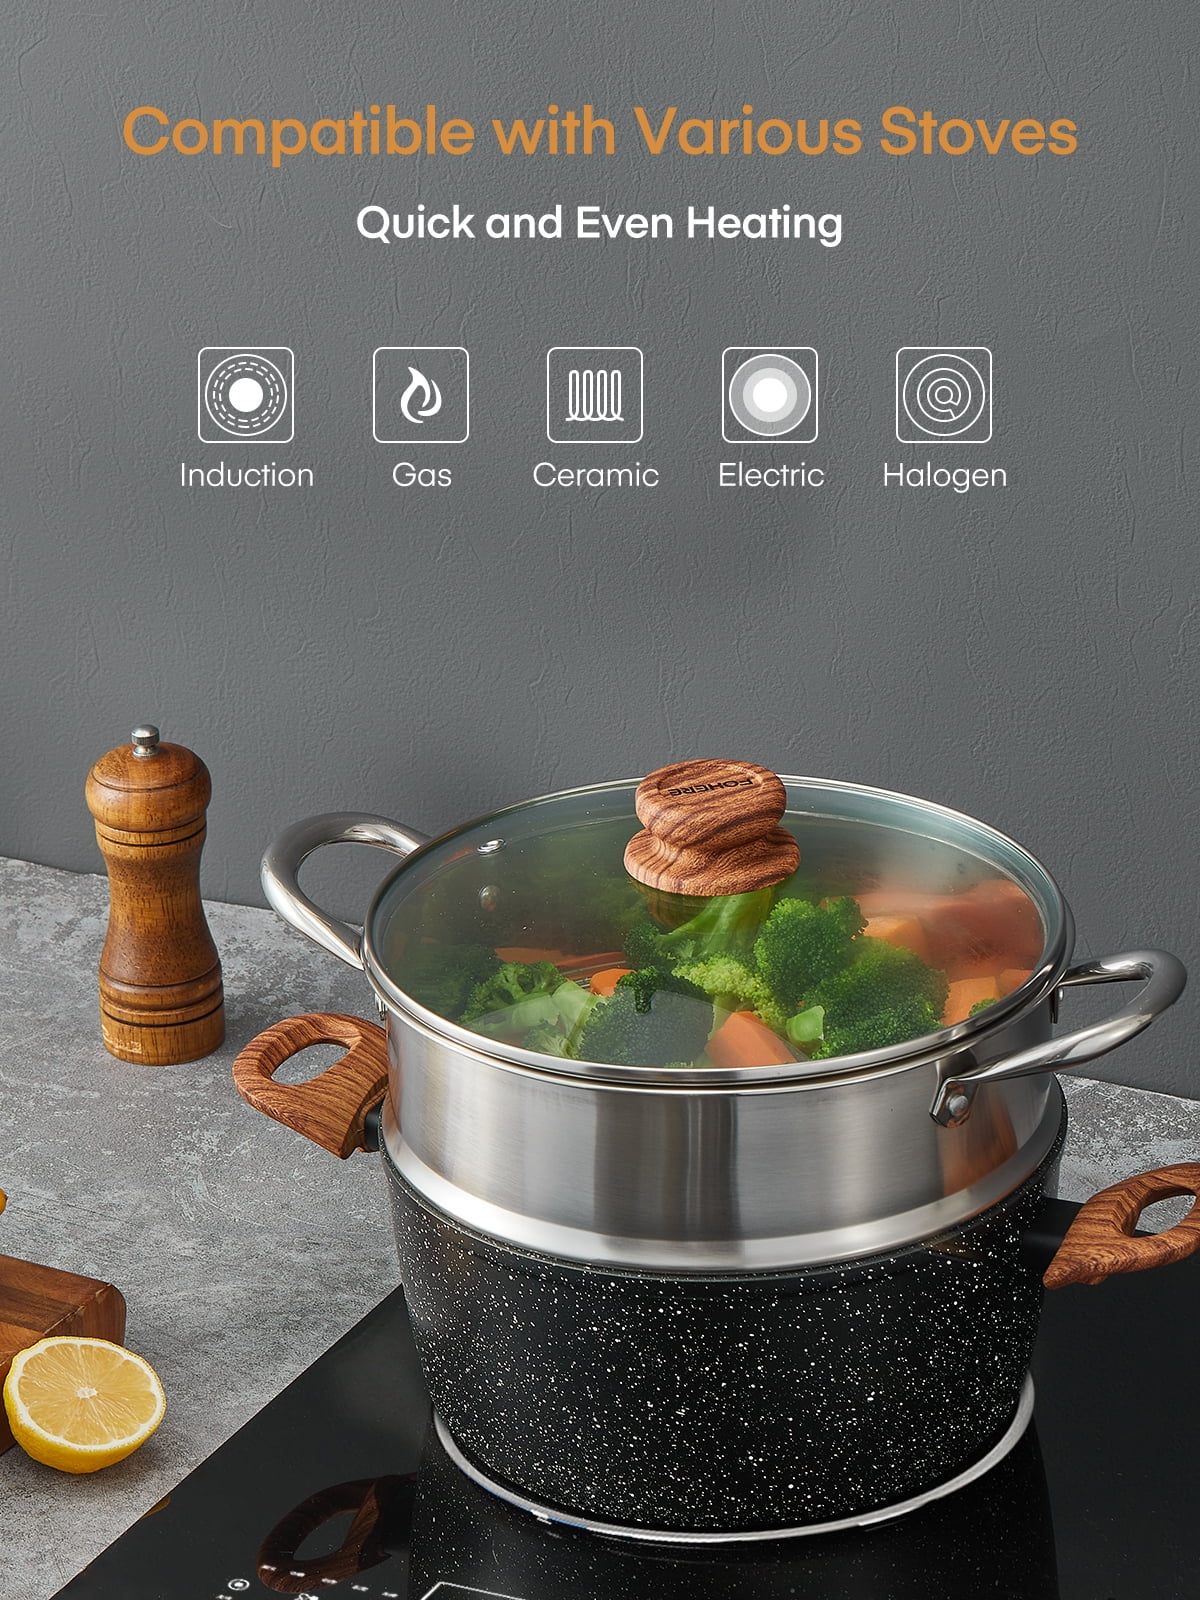 1pc Pans For Cooking, Soup Pot, Five-Ply Stainless Steel Saute Pan, Hot Pot  6 Quarts Deep Frying Pan, 12 Inch Induction Compatible Cooking Pan, Sauté  Pan With Lid, Dishwasher & Oven Safe